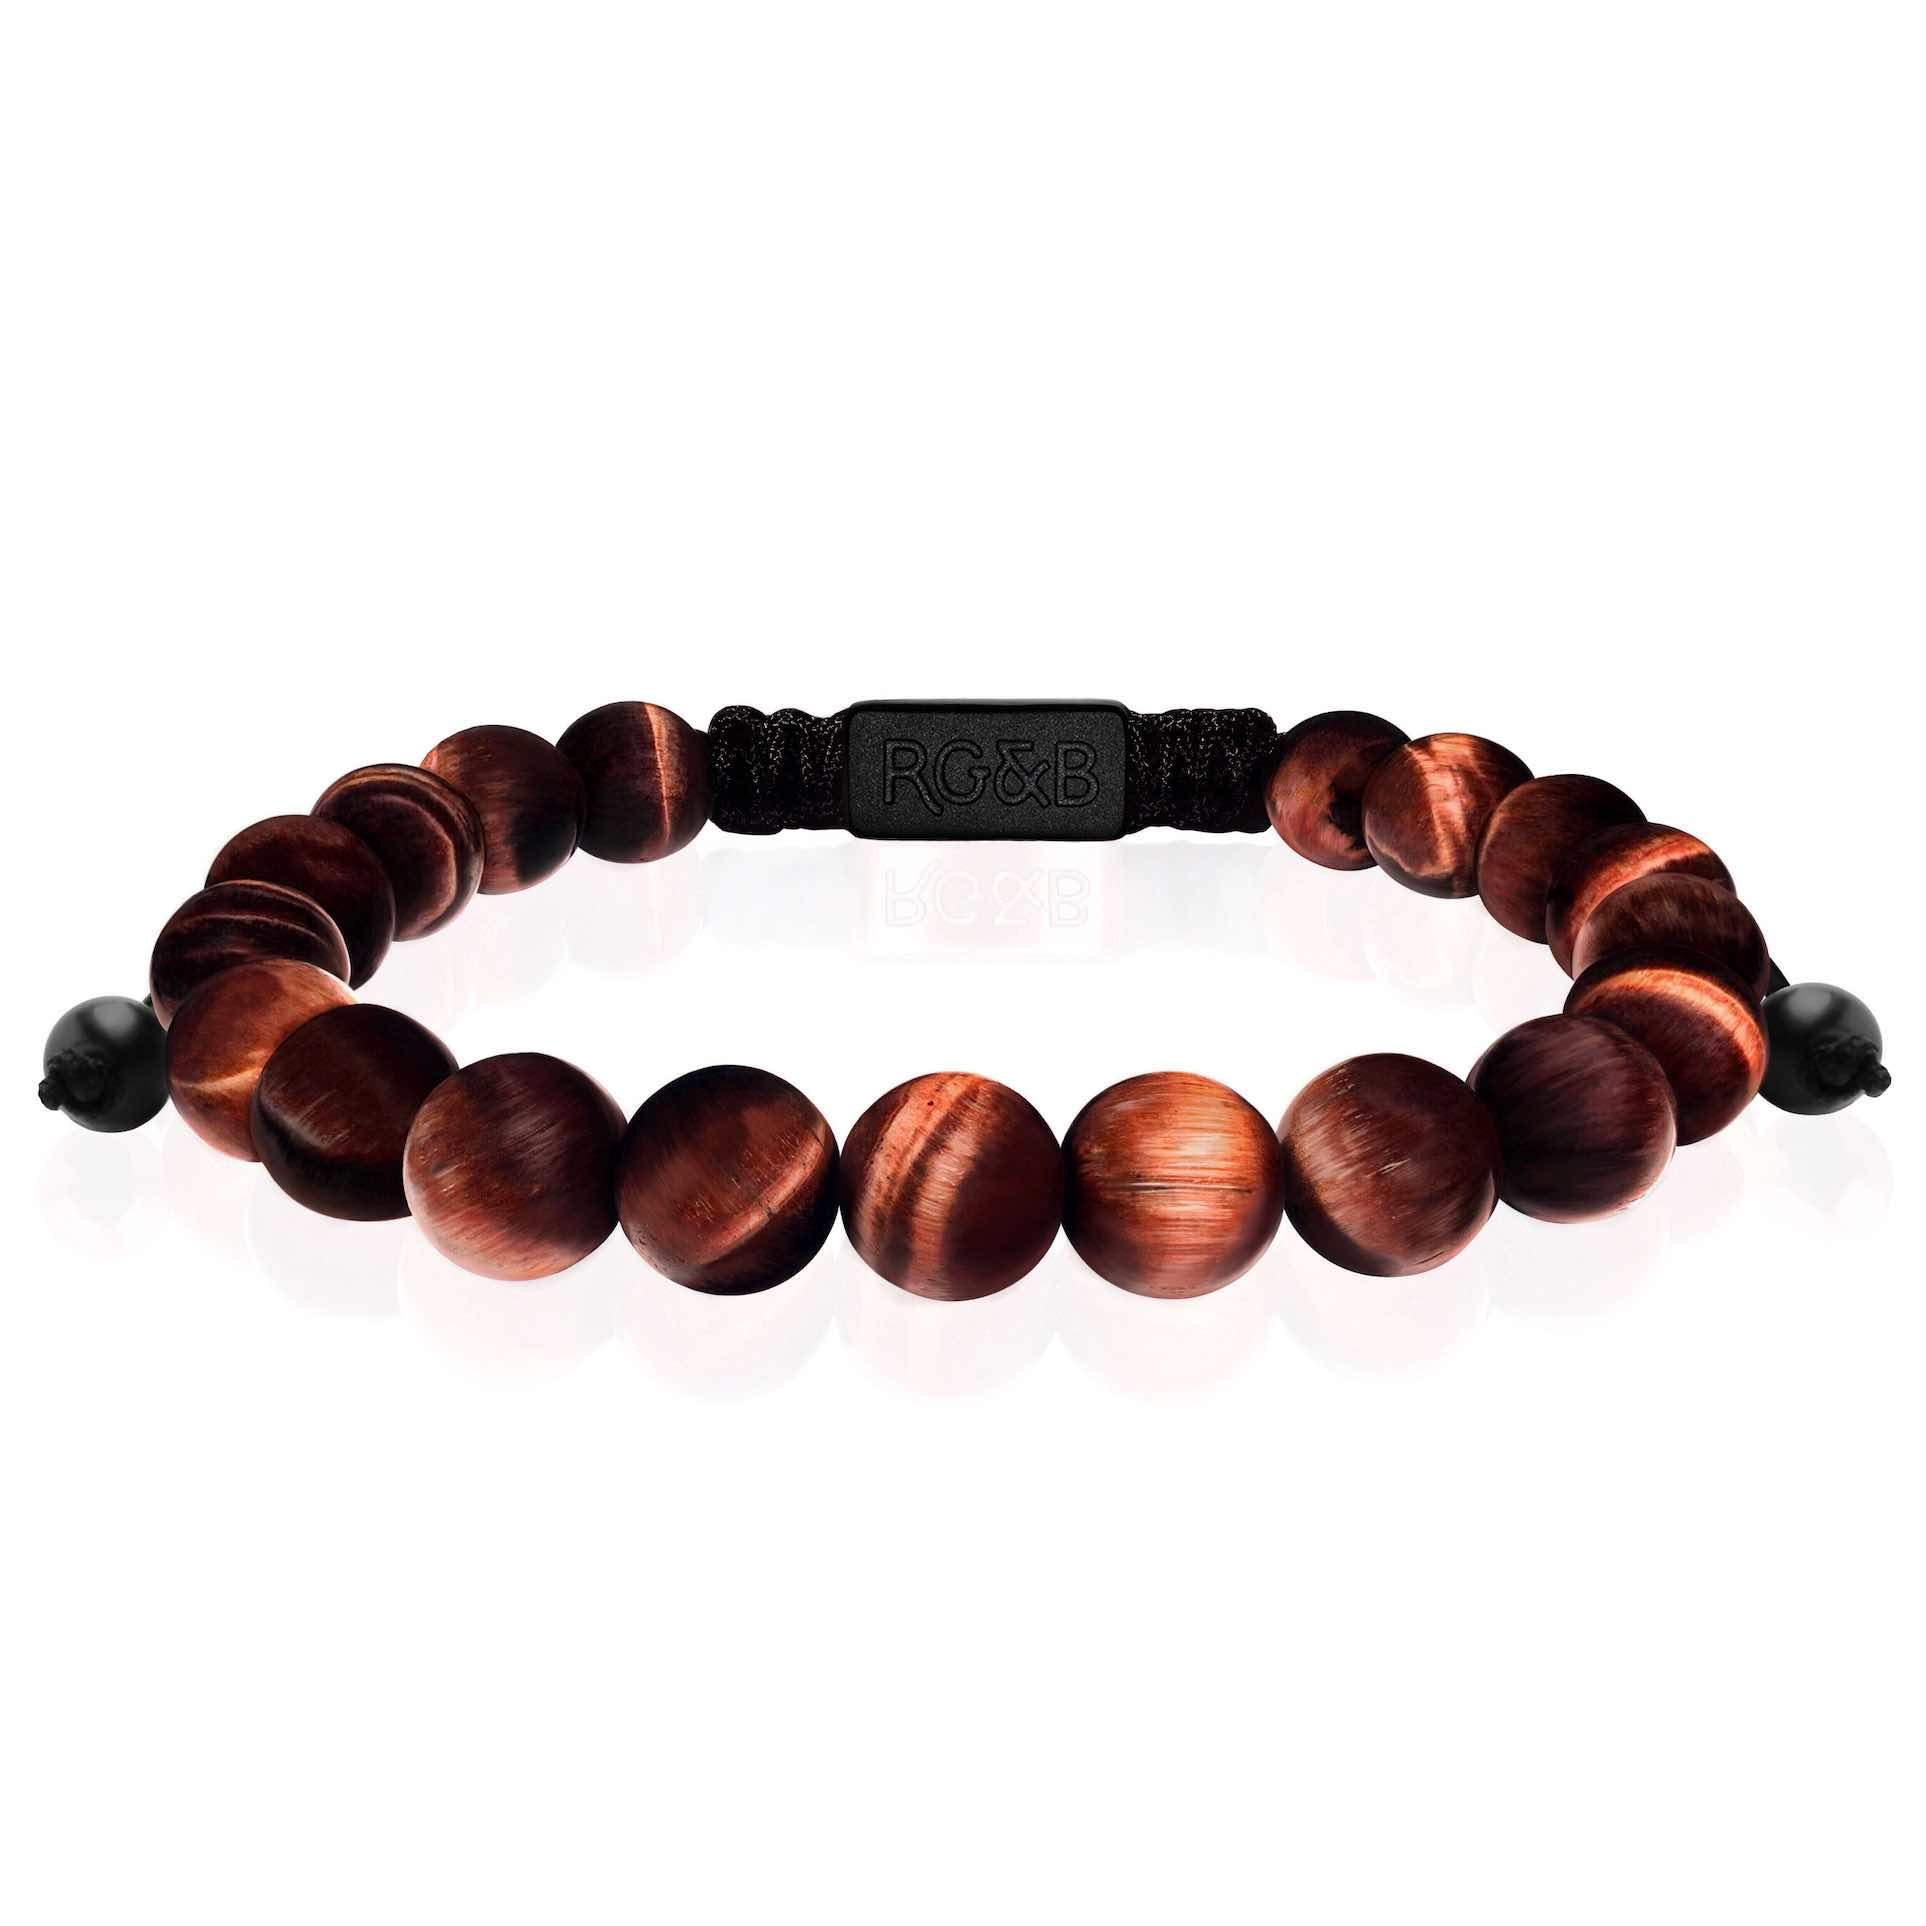 Red Tiger Eye Bead Bracelet - Our Red Tiger Eye Bead Bracelet Features Natural Stones, Waxed Cord and Brushed Black Steel Hardware. A Beautiful Addition to any Collection.